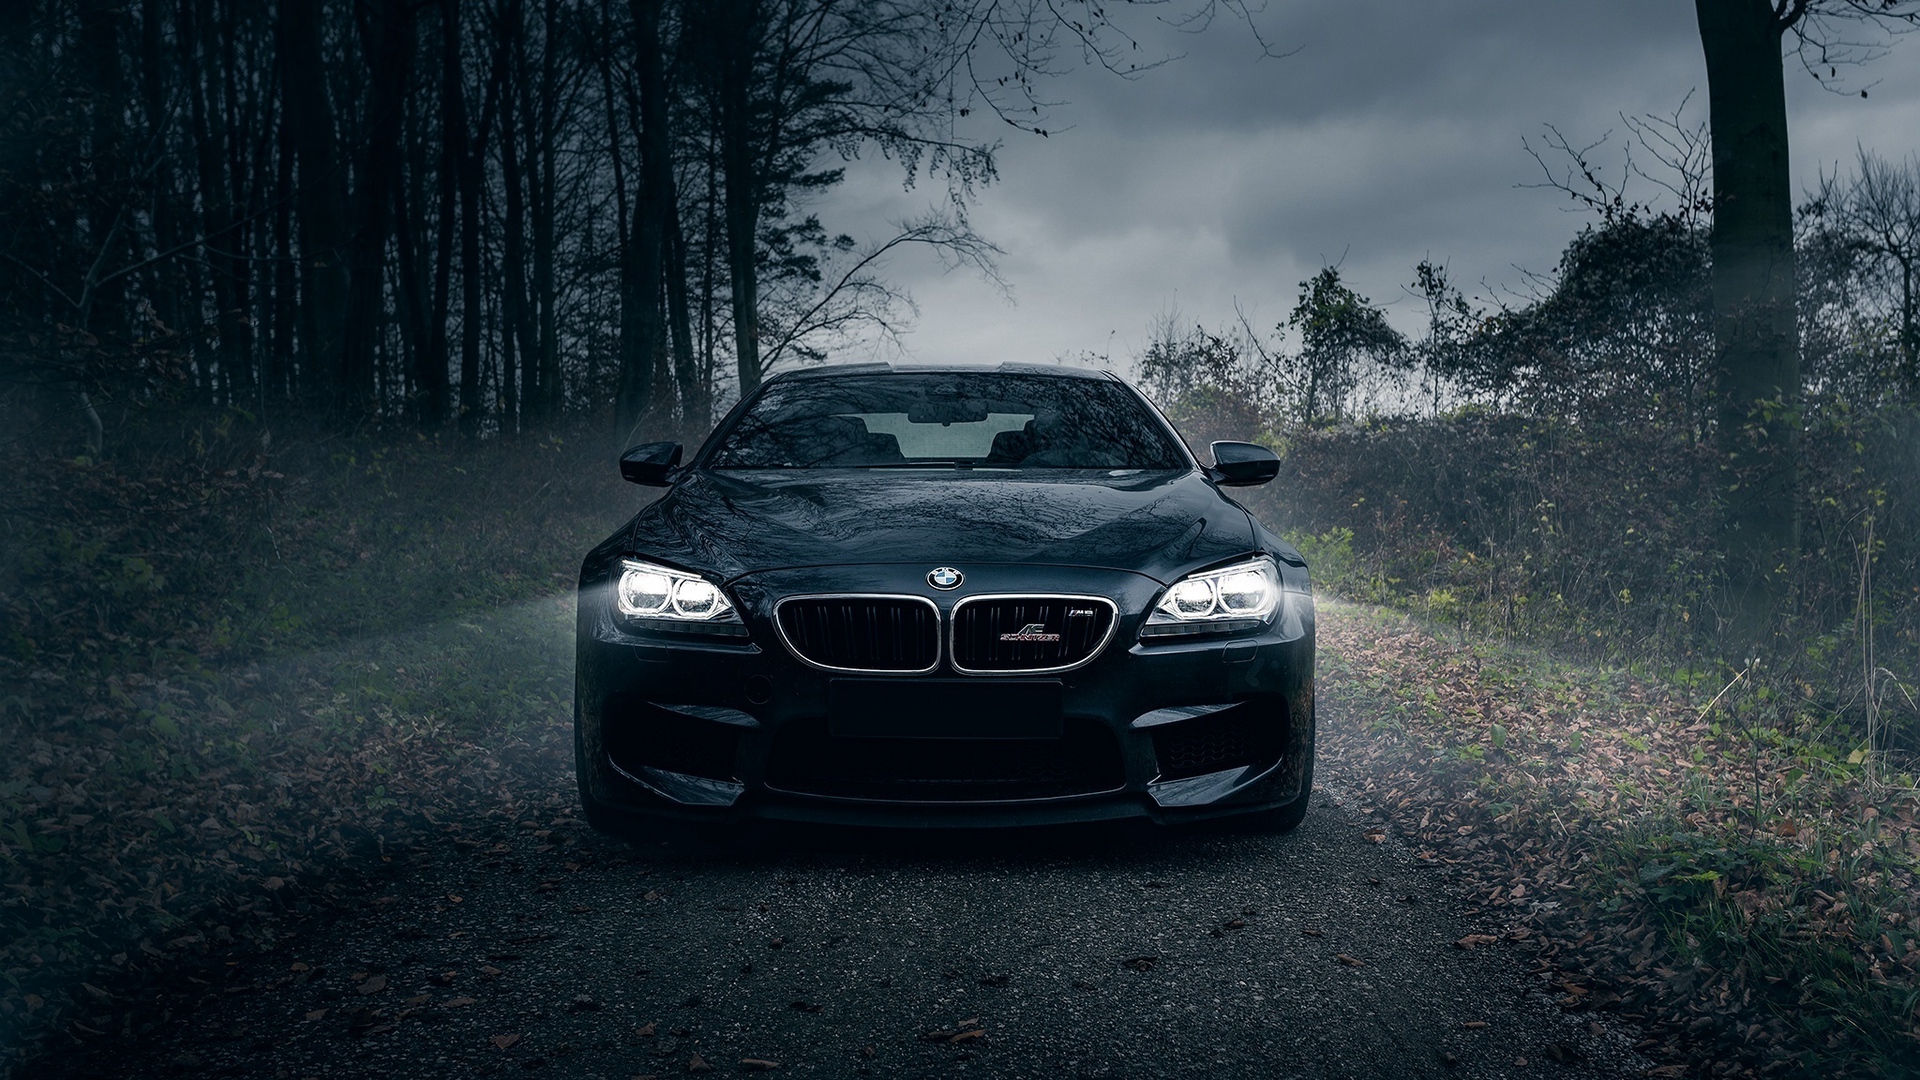 Forest Night Of Bmw M6 Front Light On Wallpaper